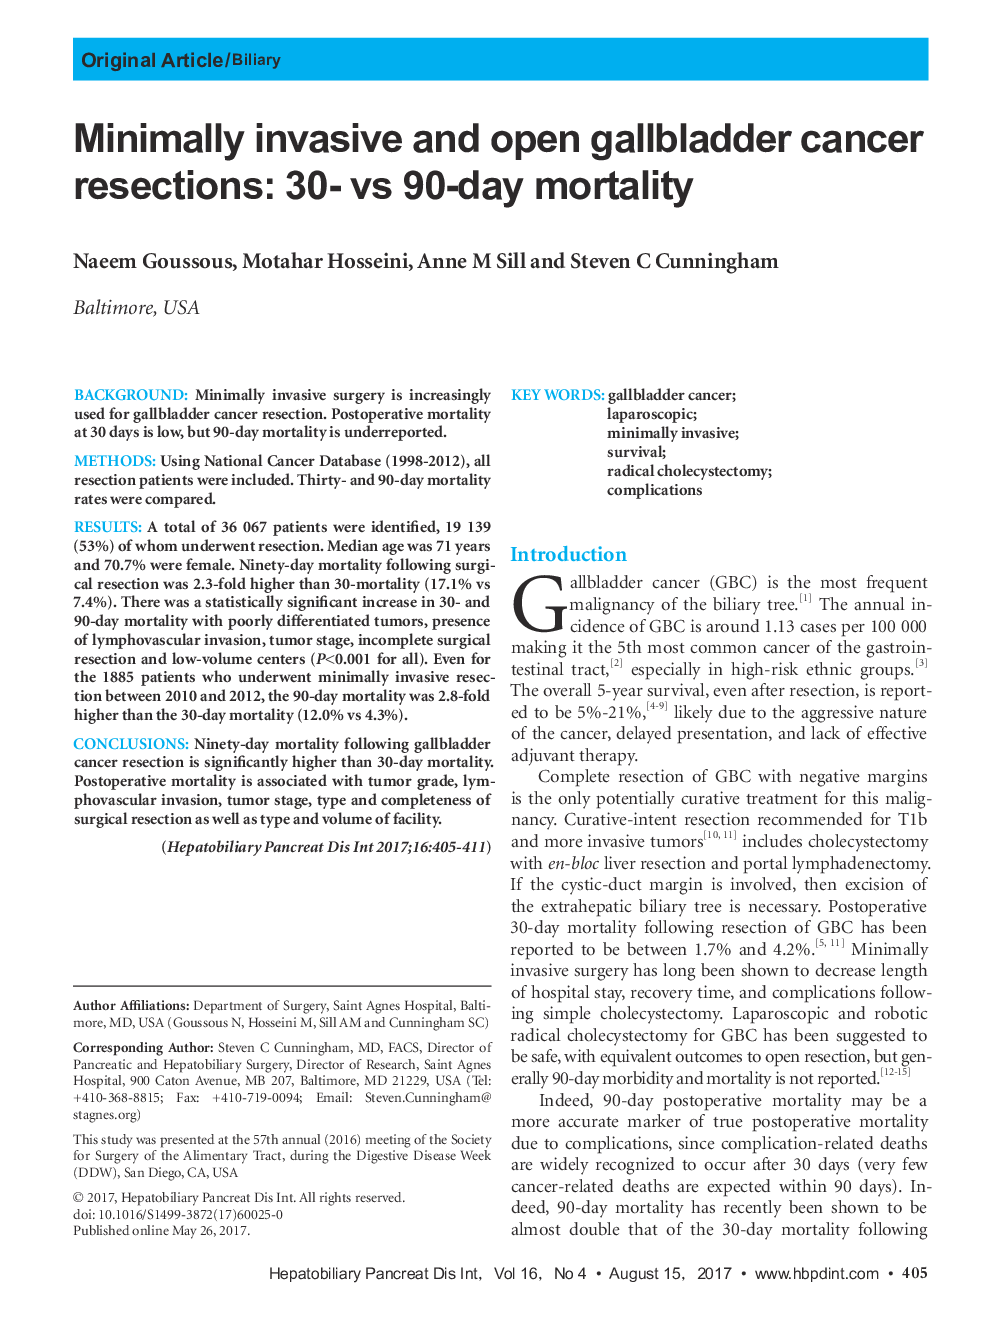 Minimally invasive and open gallbladder cancer resections: 30- vs 90-day mortality